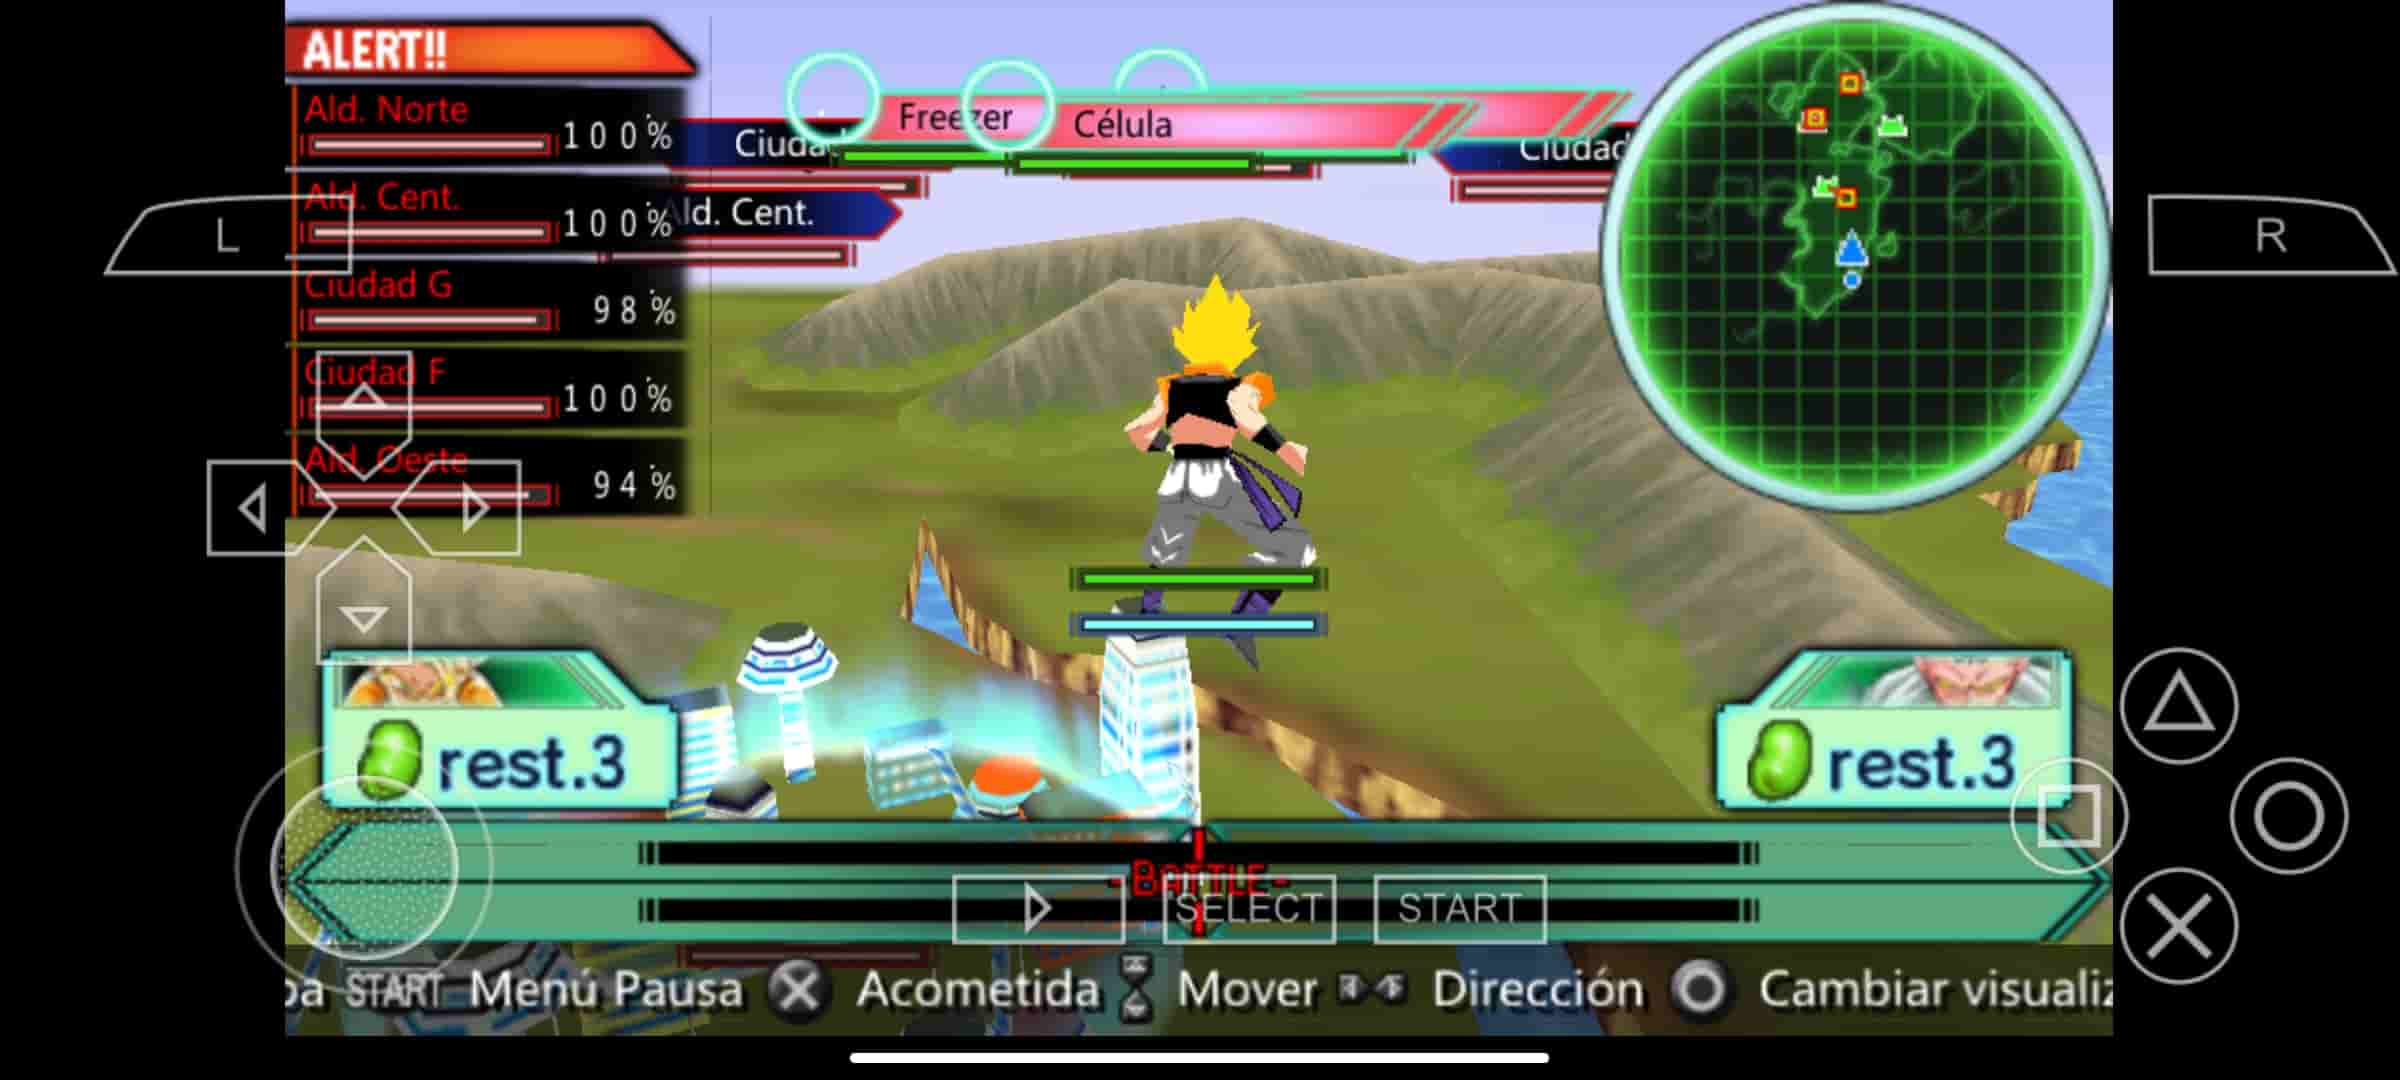 Dragon Ball Z Shin Budokai 6 Ppsspp Download Highly Compressed